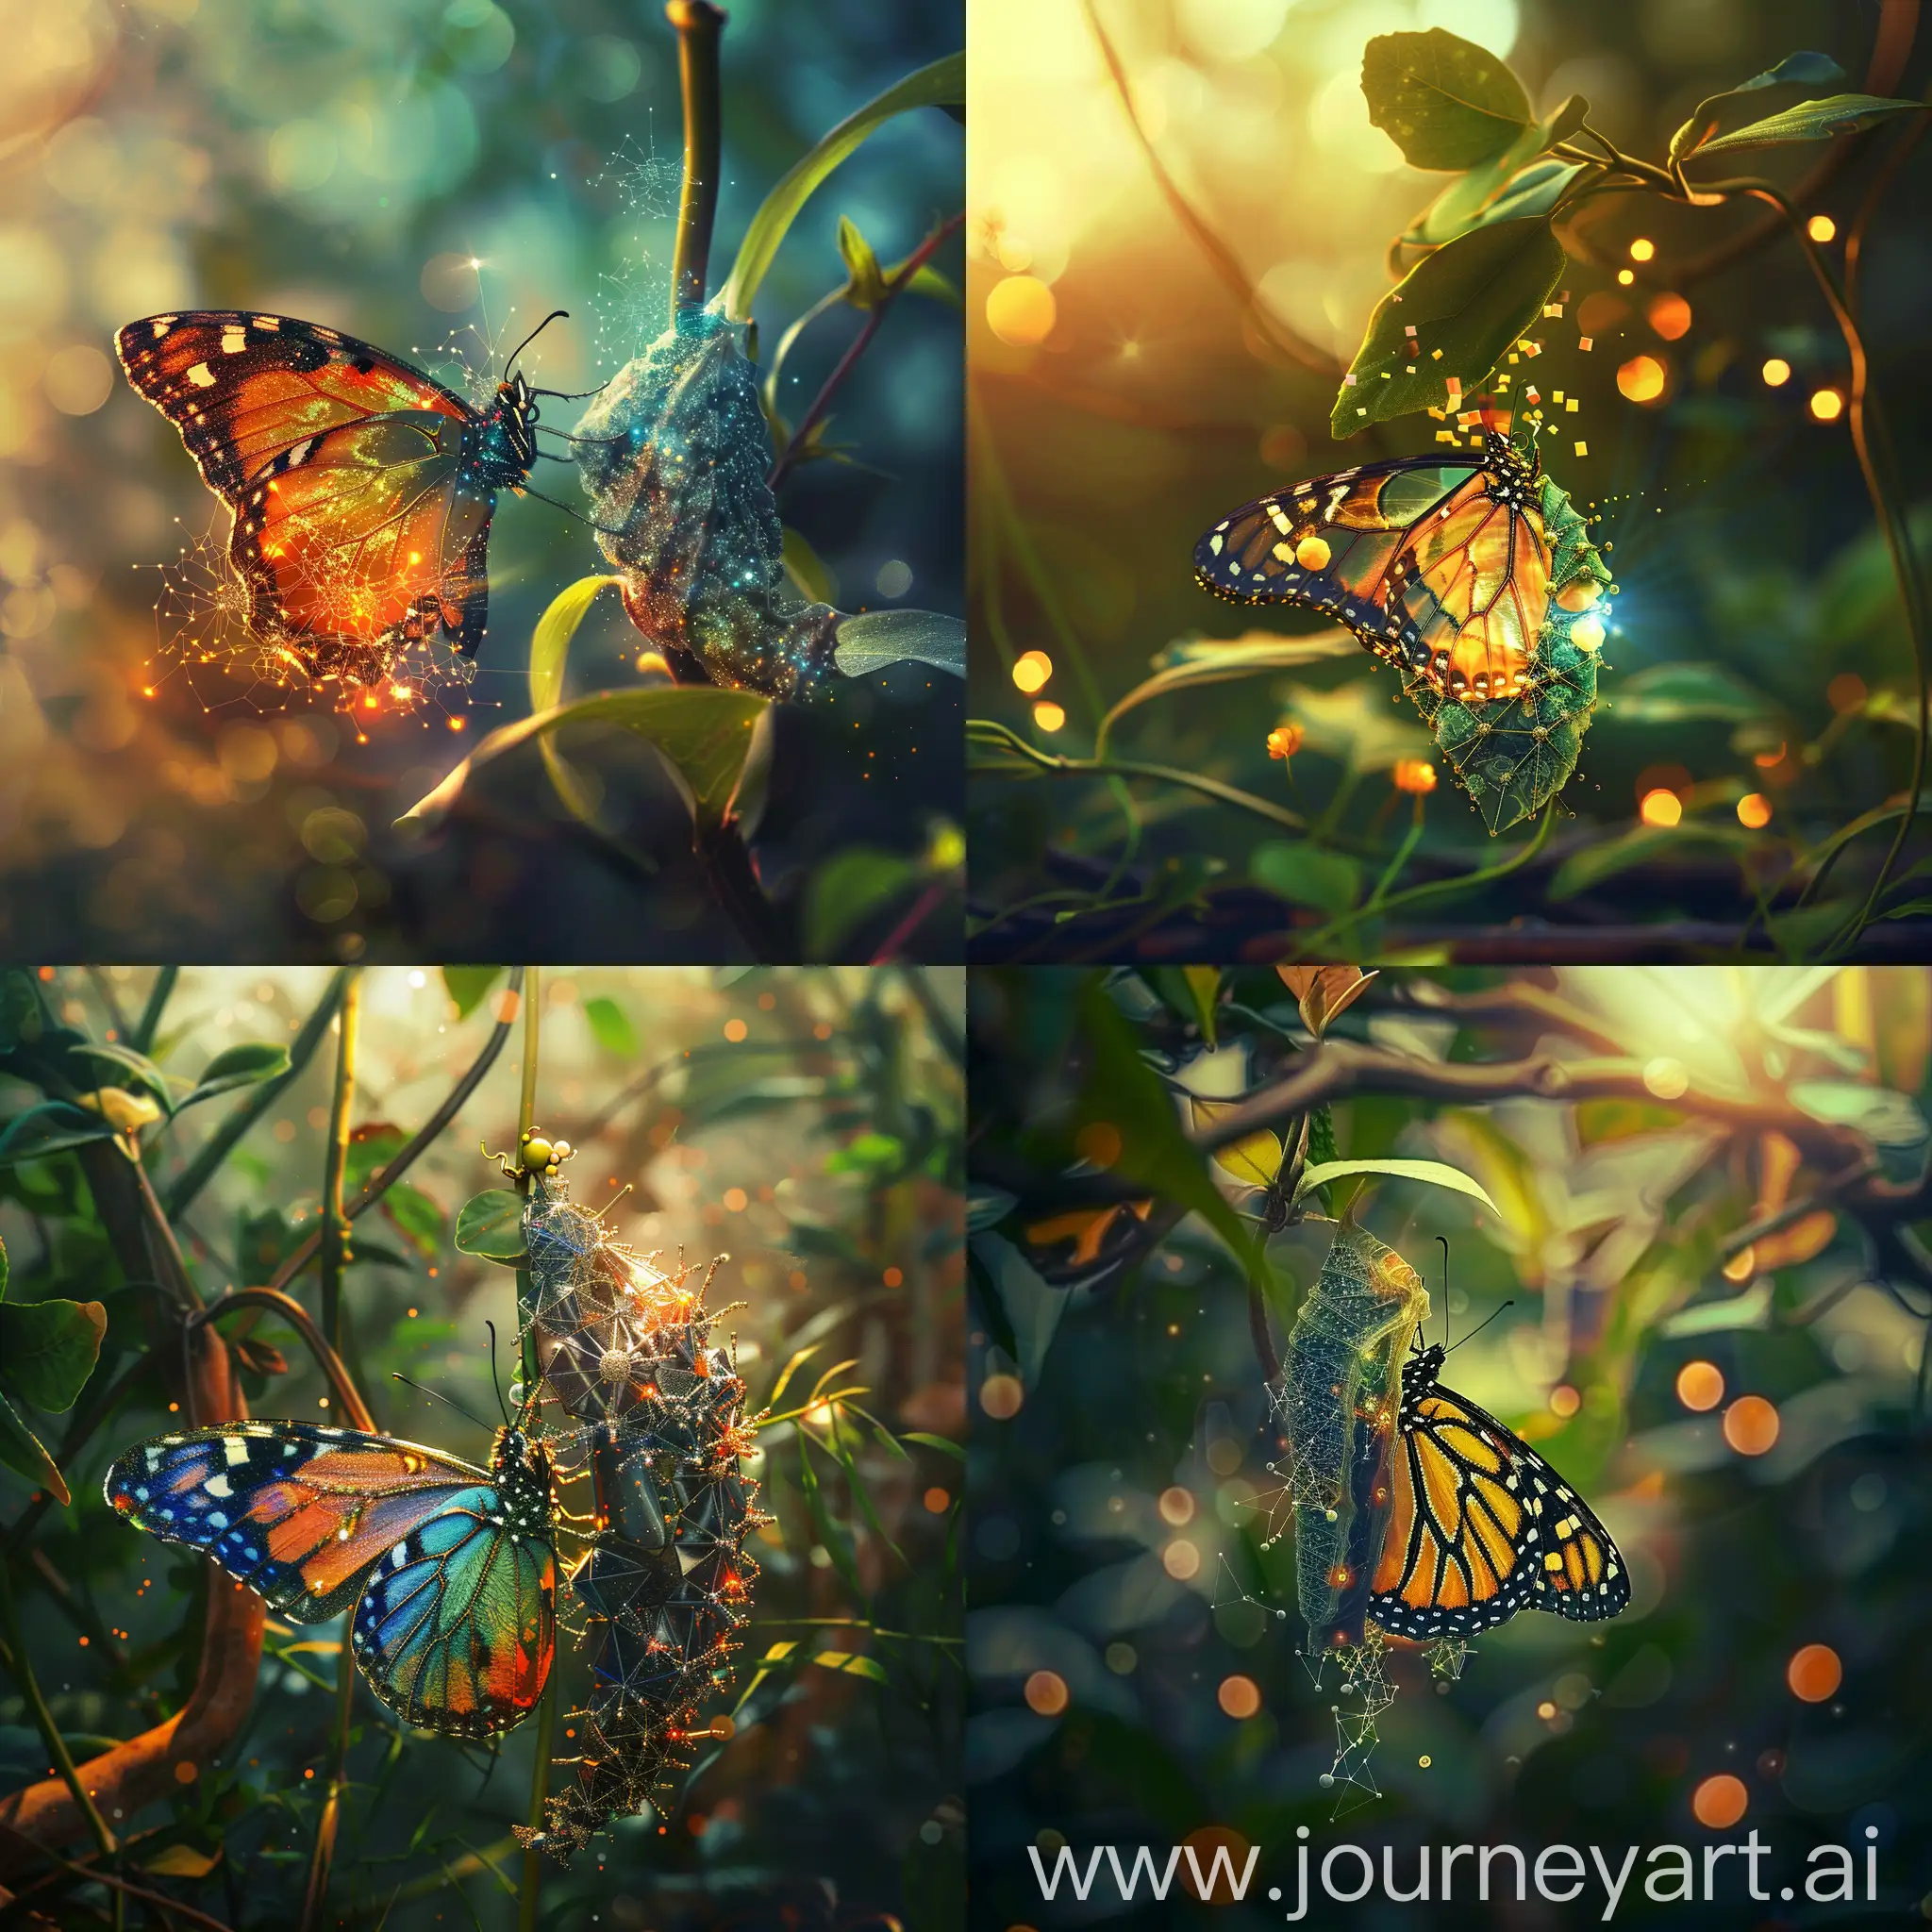 Vibrant-Quantum-Butterfly-Emerges-Symbolizing-Imminent-Change